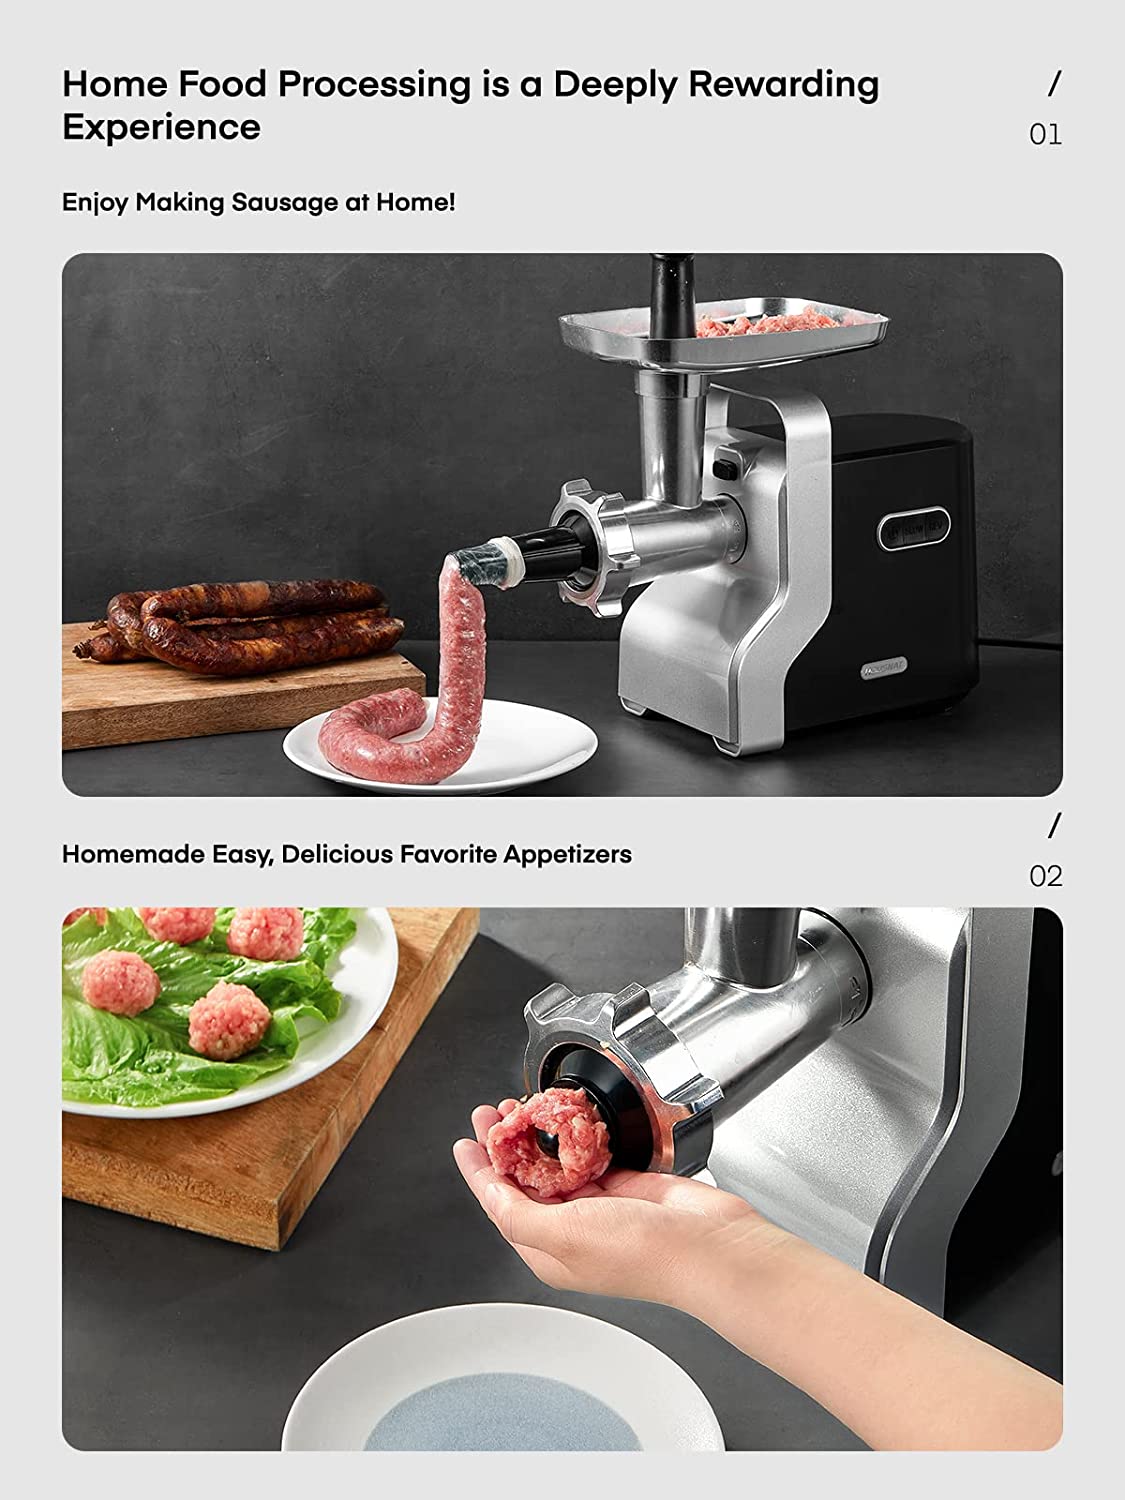 home food processing is a deeply rewarding experience, Heavy Duty Electric Meat Grinder, 2500W Max Ultra Powerful, 5 in 1 HOUSNAT Multifunction Food Grinder, Sausage Stuffer, Slicer/Shredder/Grater, Kubbe & Tomato Juicing Kits, Home Kitchen Use